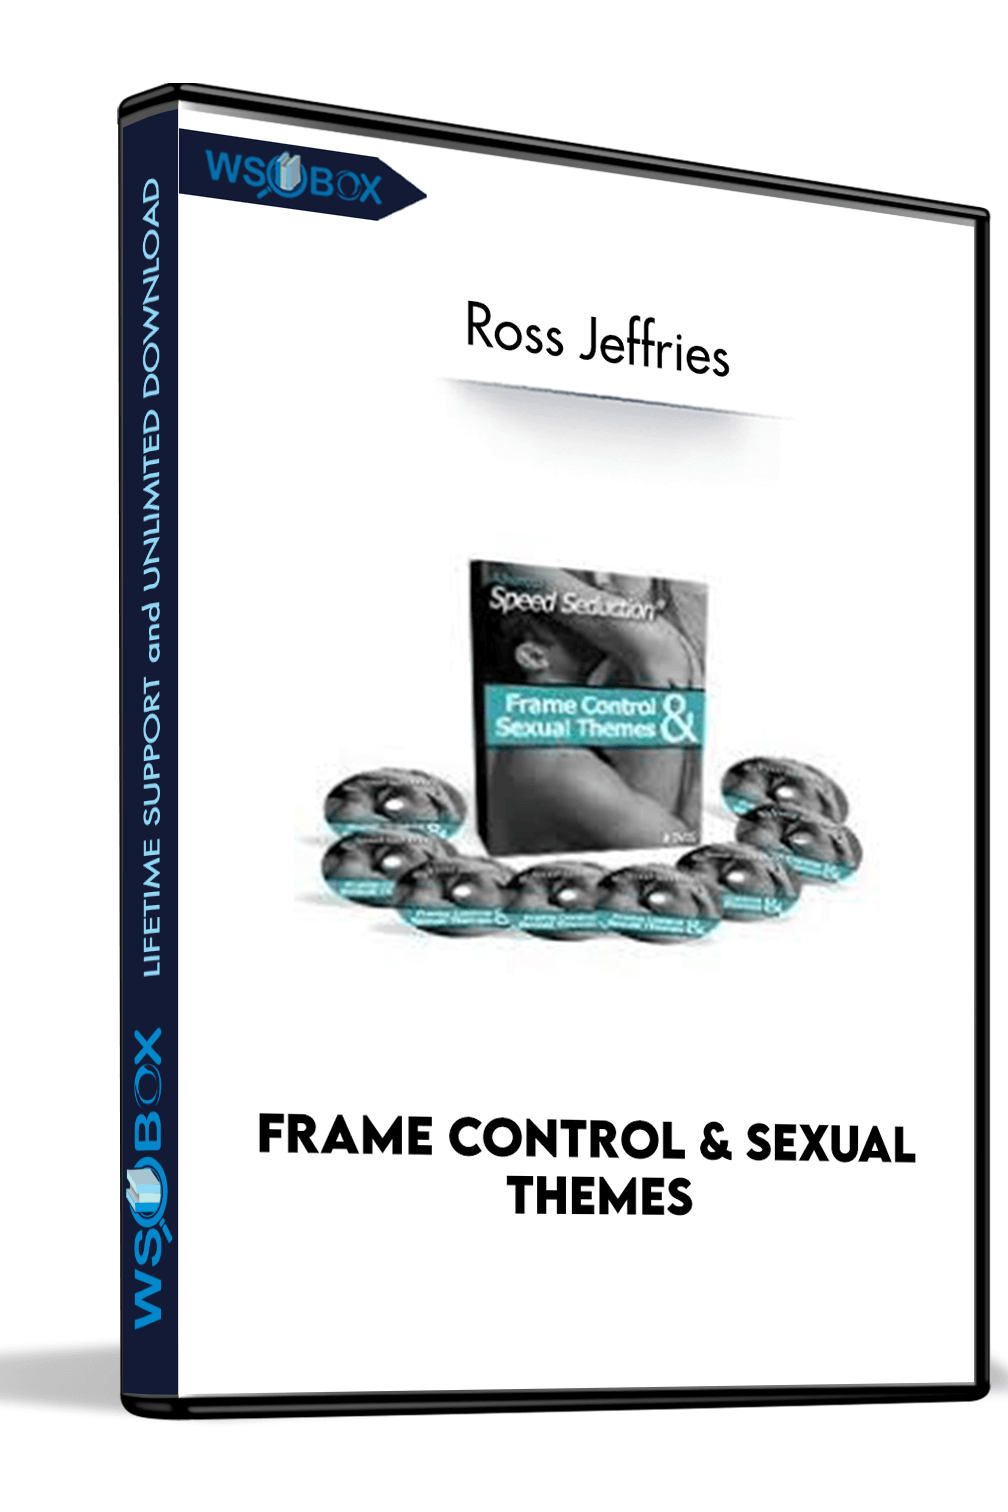 frame-control-sexual-themes-ross-jeffries